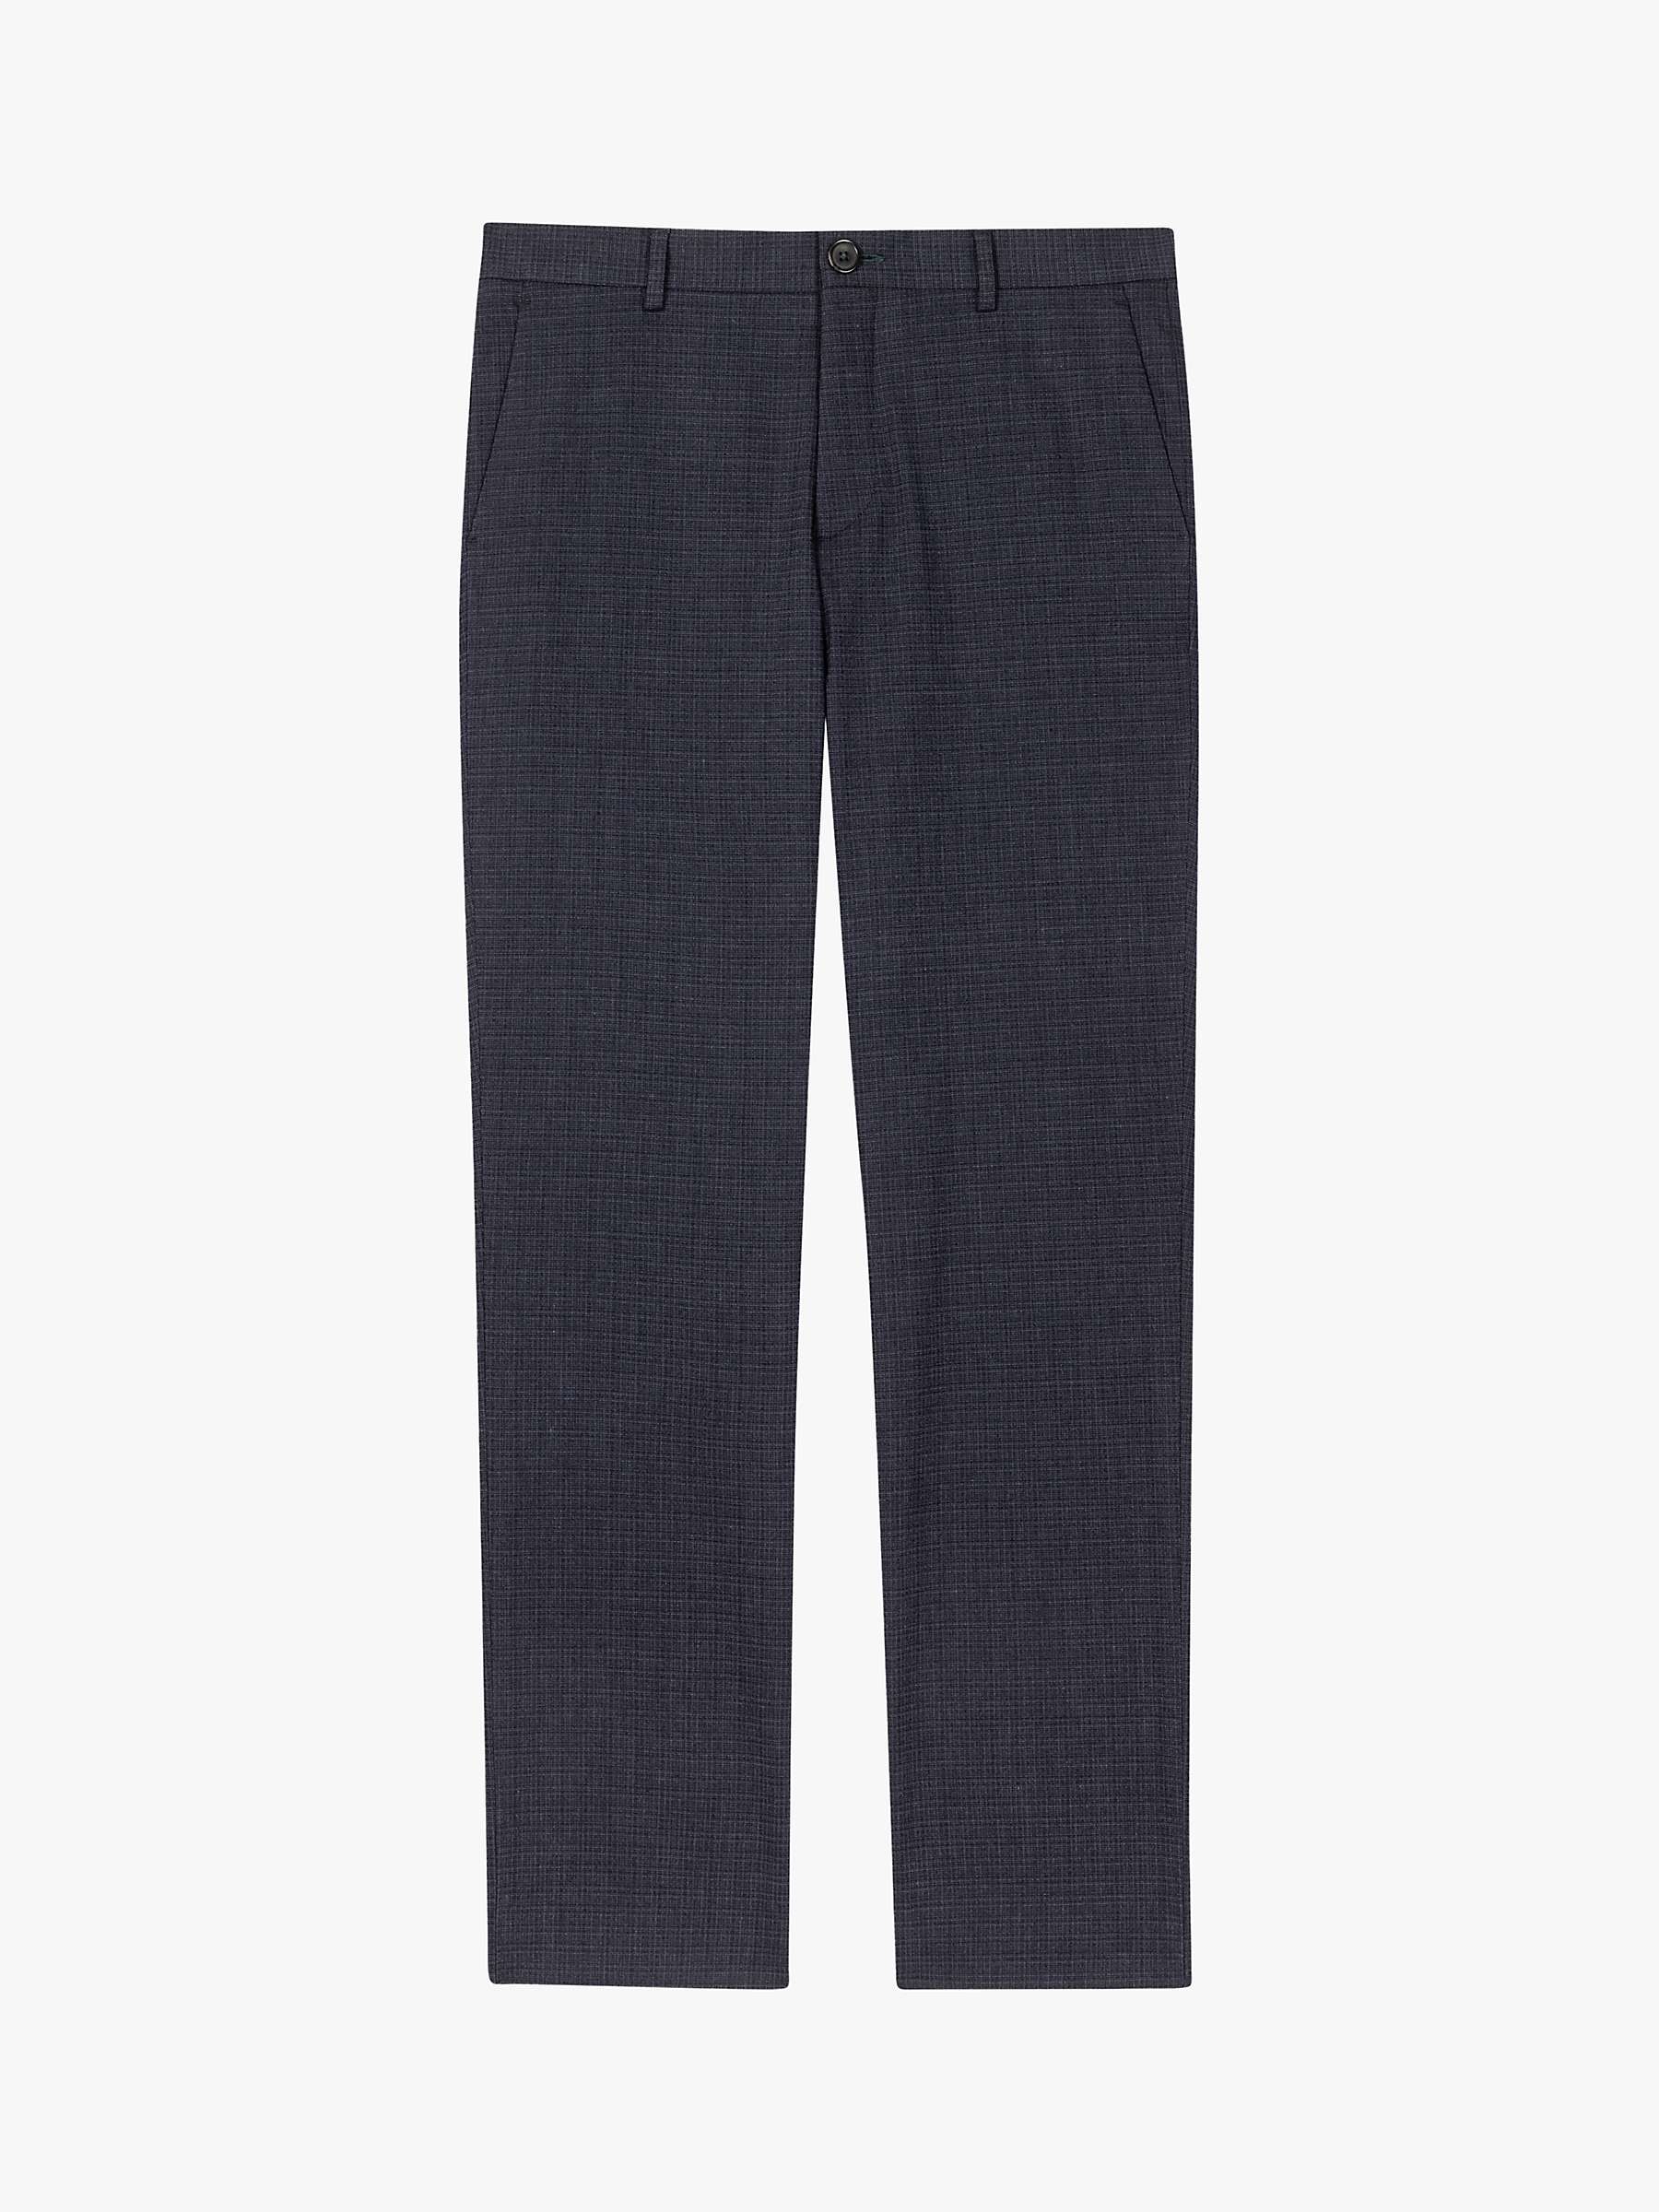 Buy Paul Smith Mid-Fit Chino, Black Online at johnlewis.com